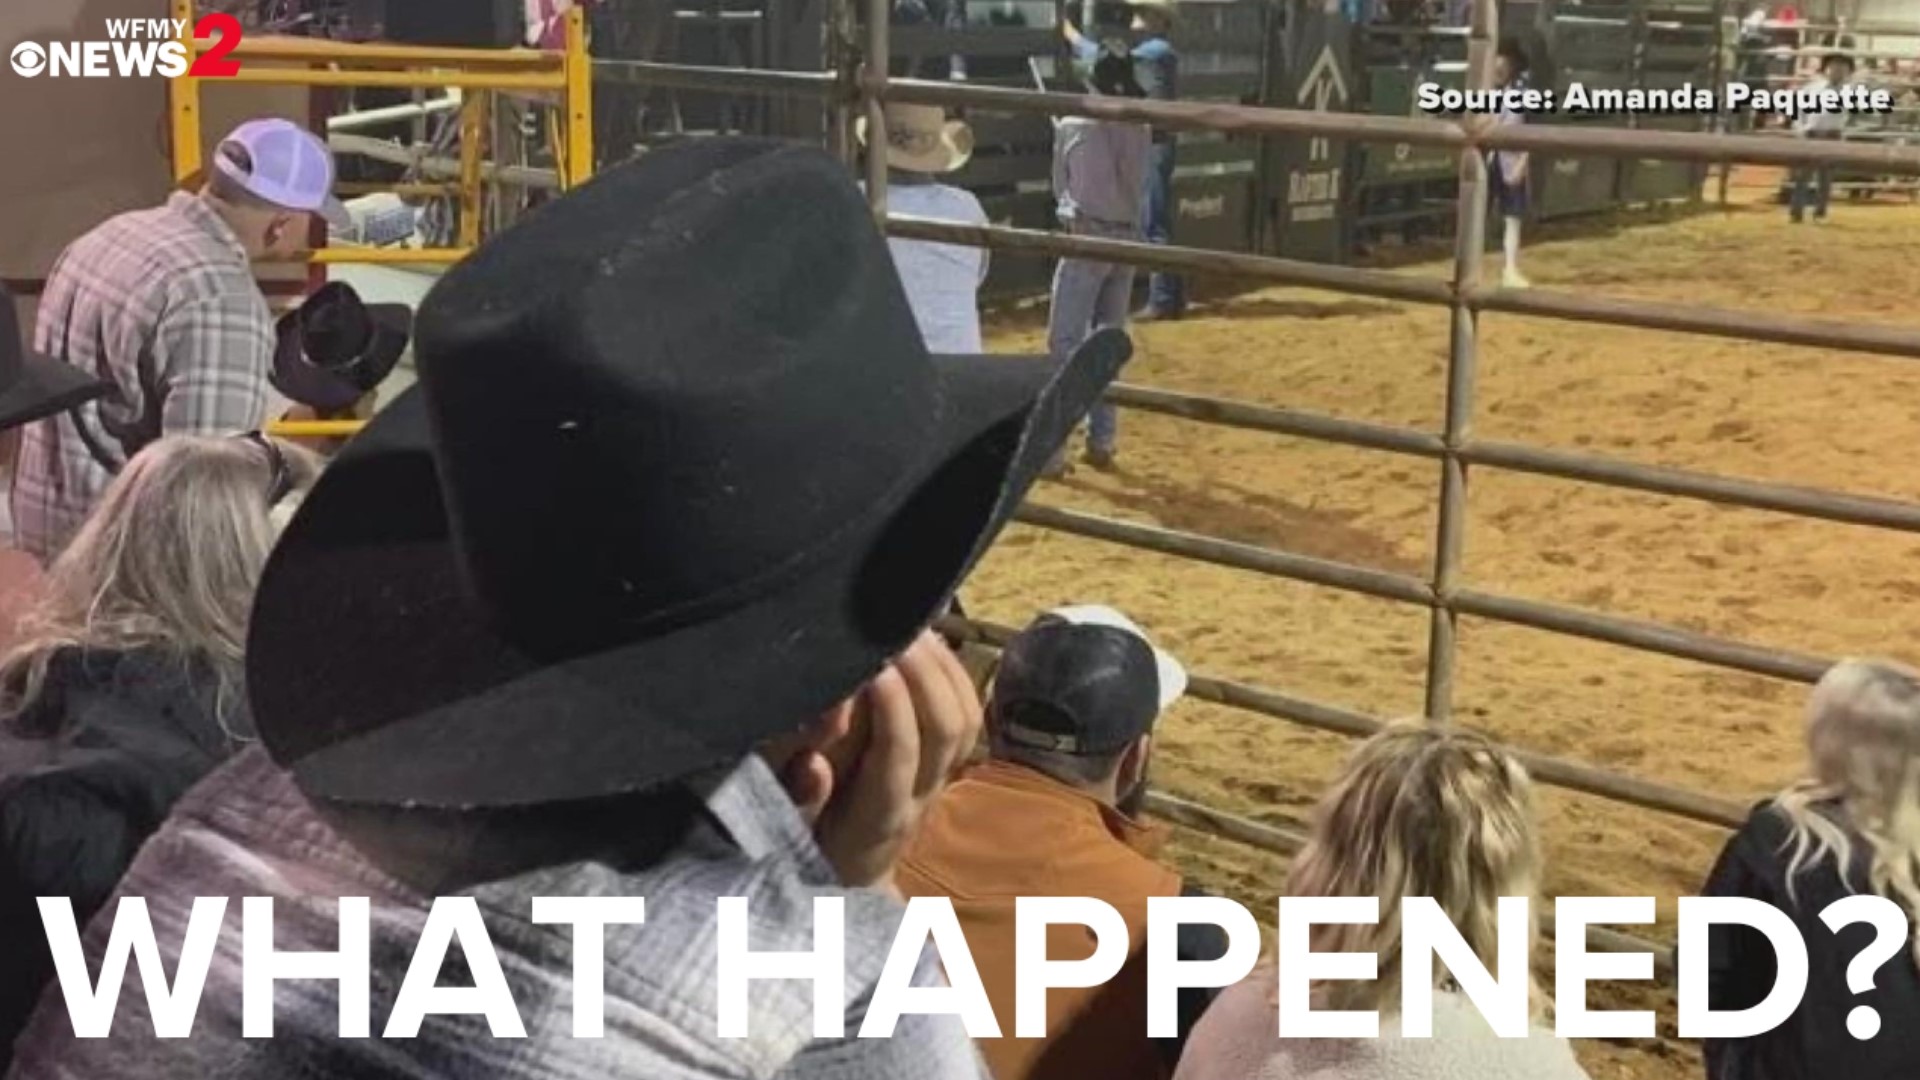 A child died Saturday after a competition at Rafter K. Rodeo in King, NC. It’s raised many questions about the dangers of the sport.